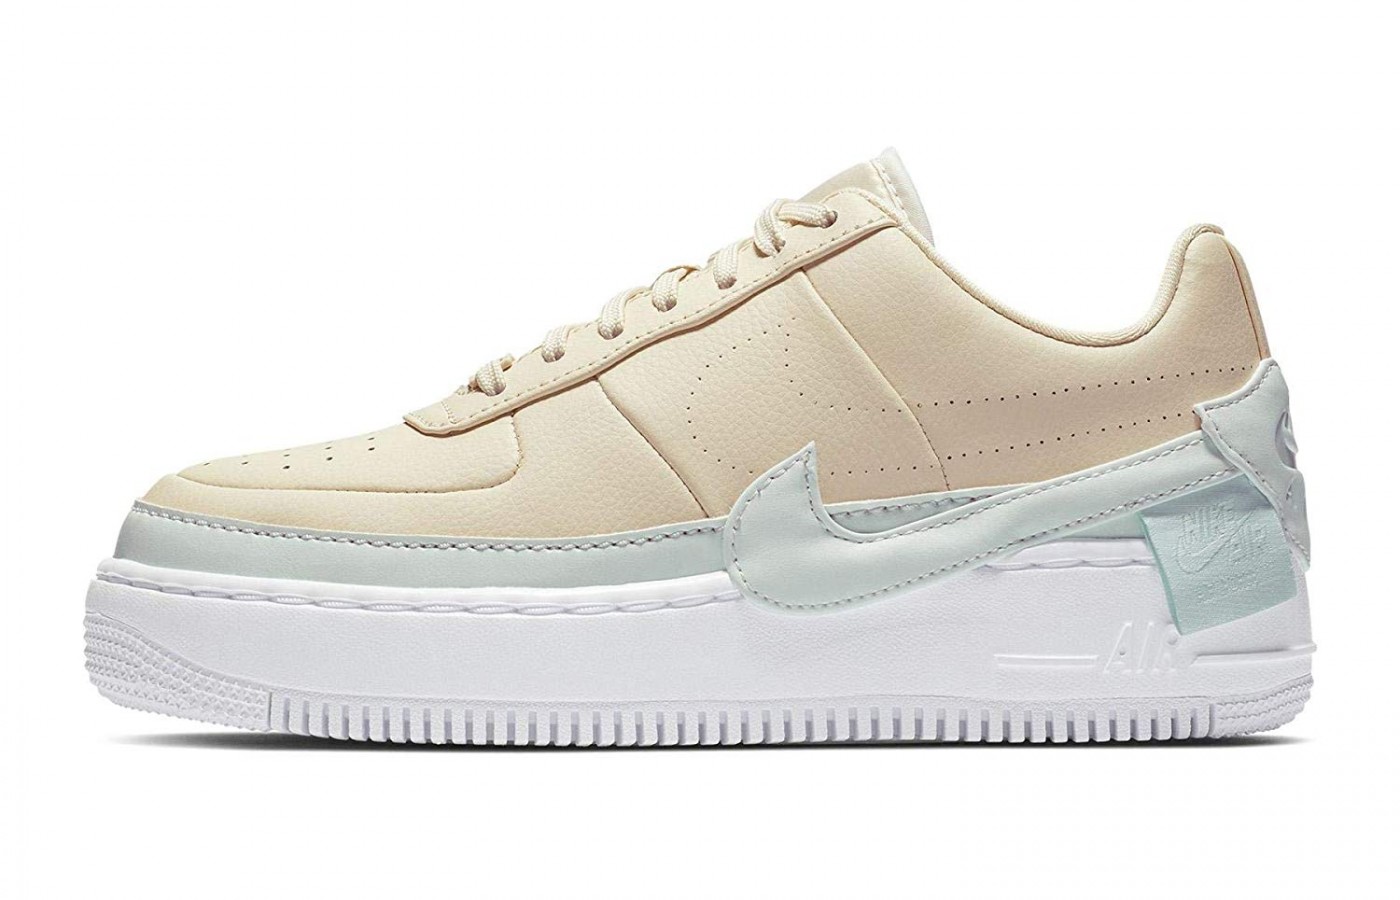 Nike Air Force 1 Jester XX side